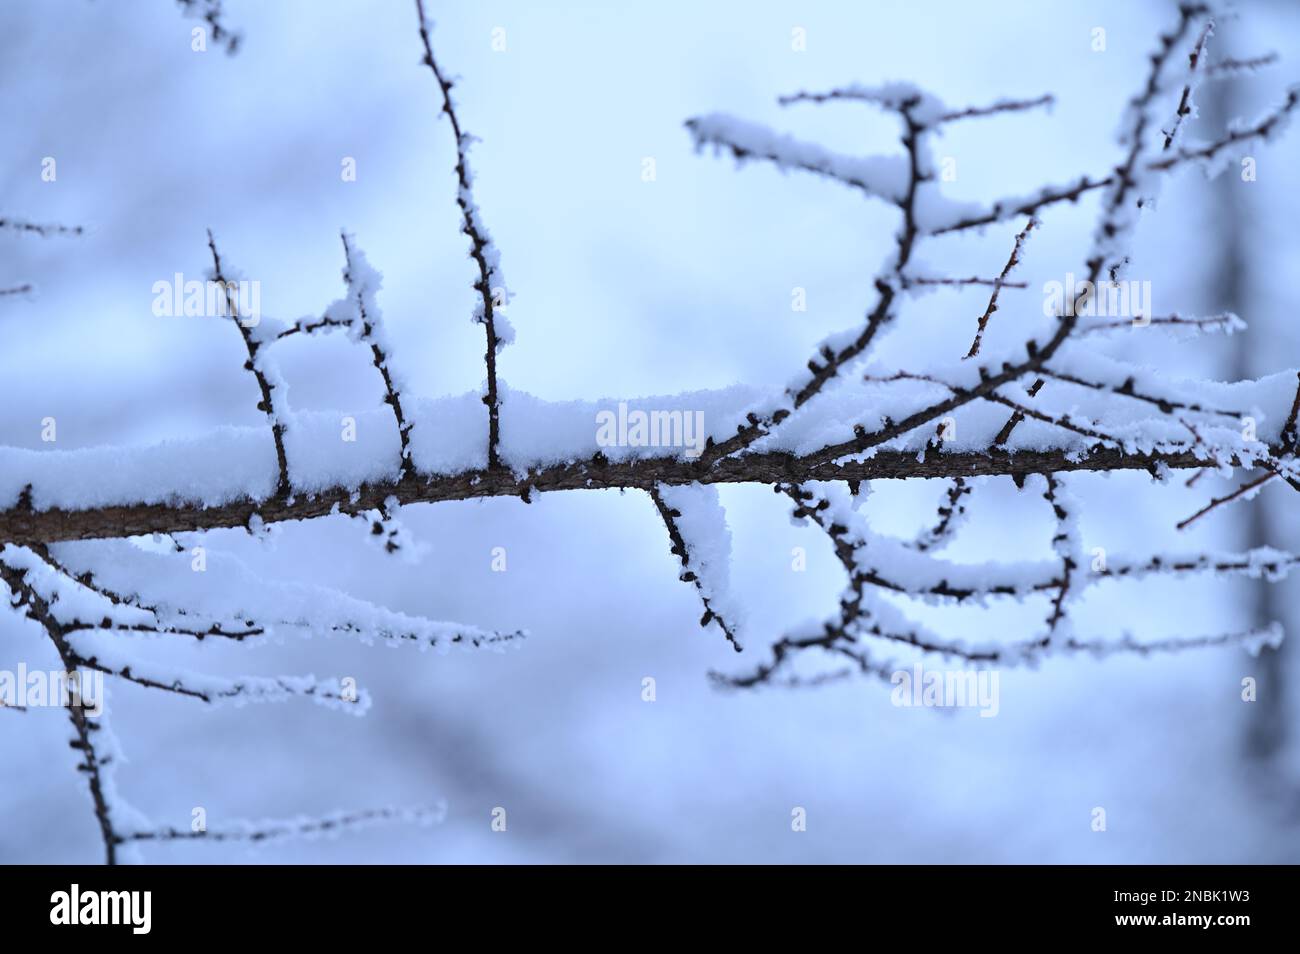 White snow is piled up on the branches Stock Photo